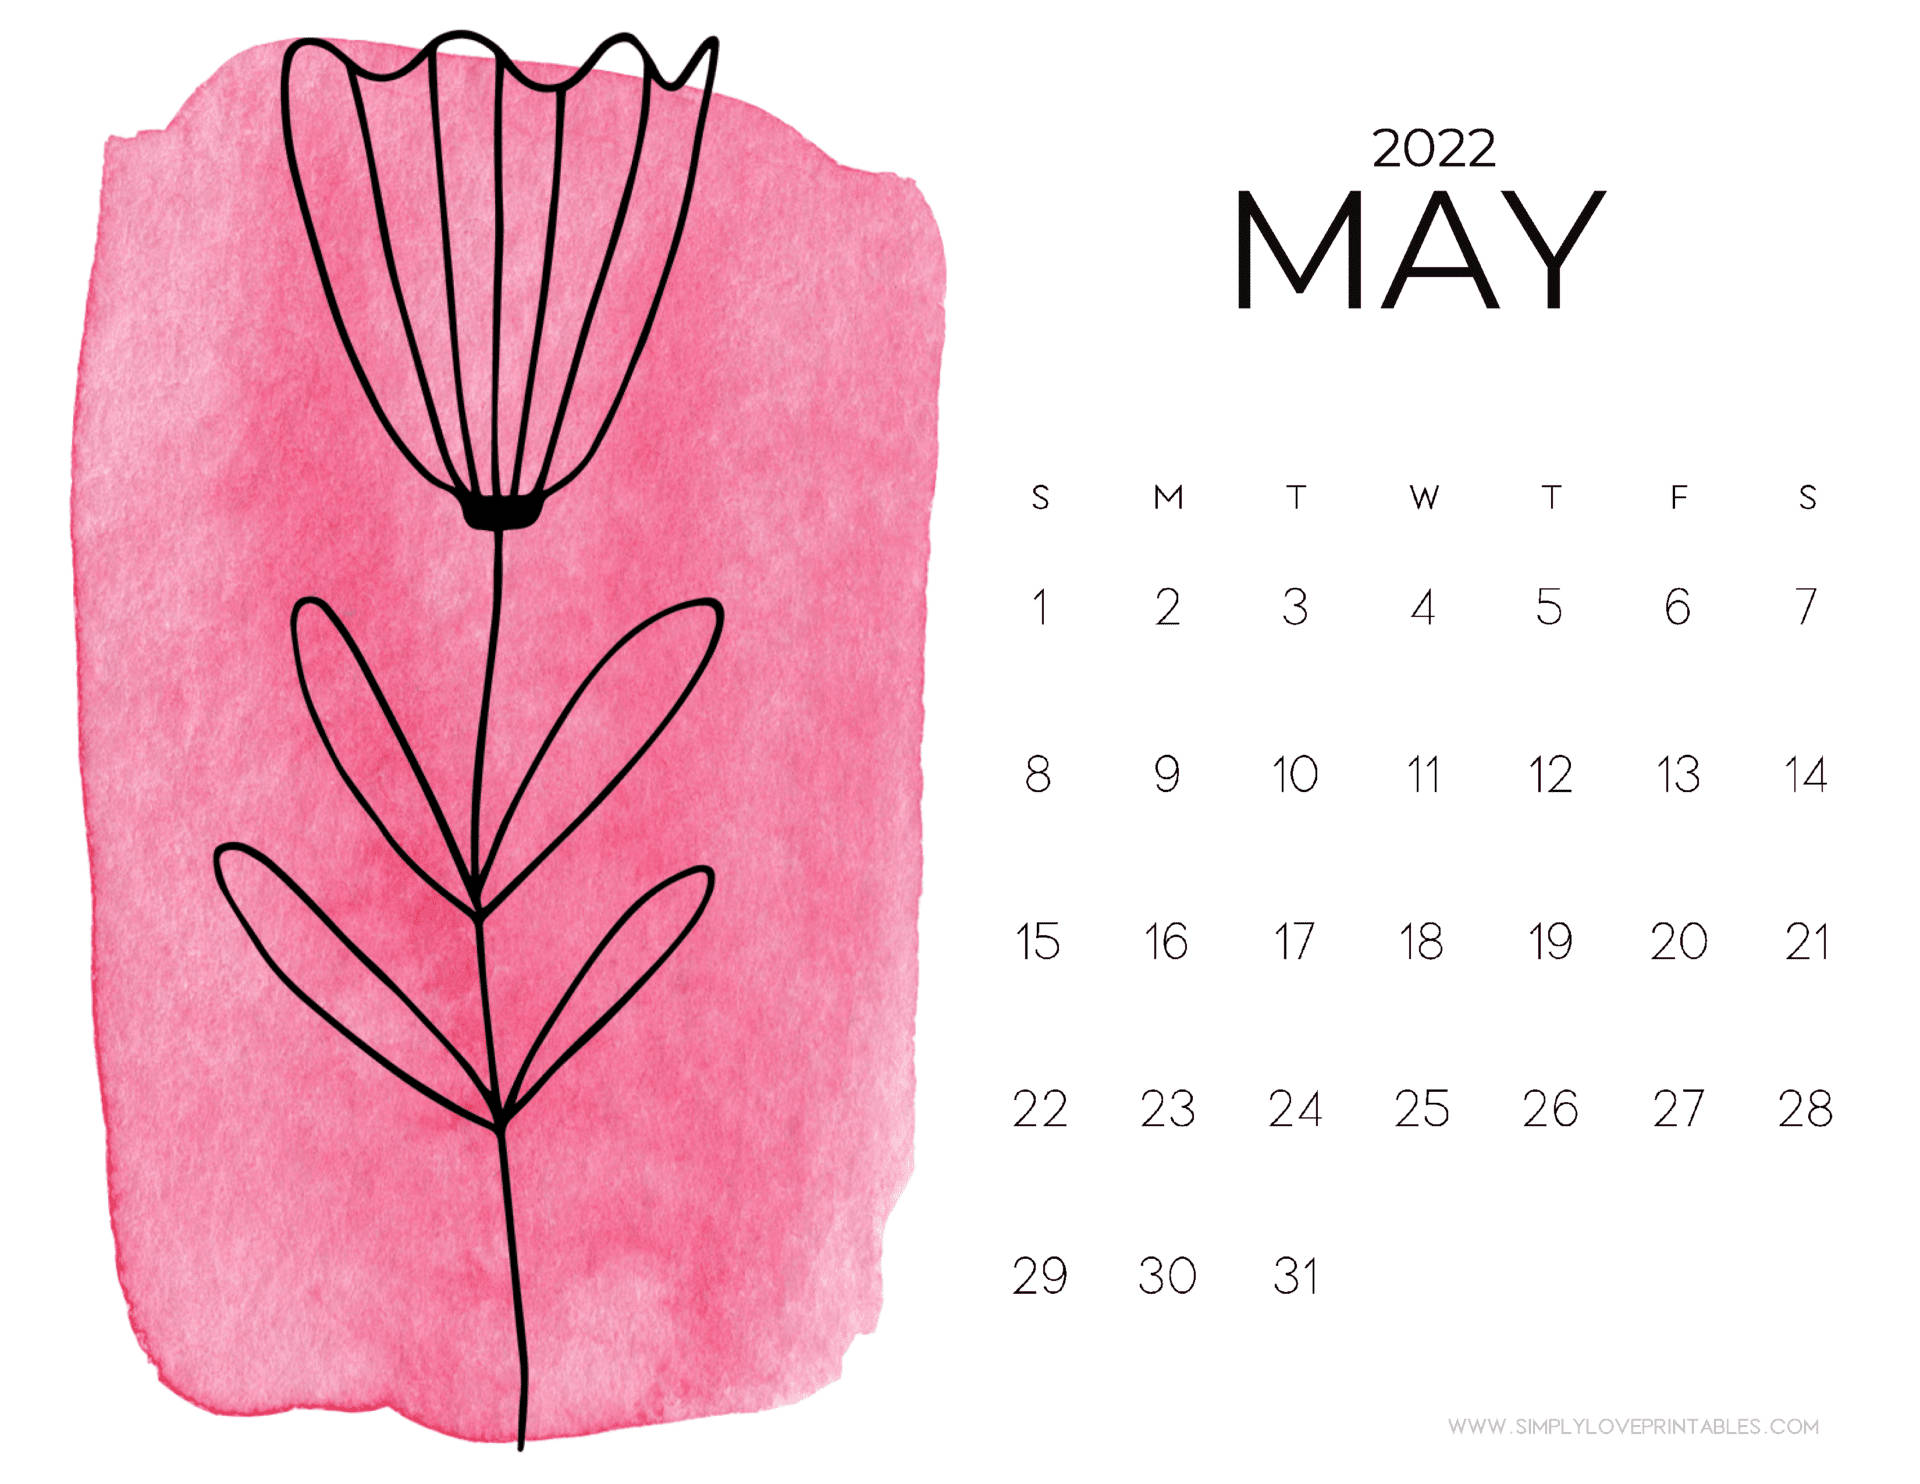 Schedule Your May 2022 Plans with this Colorful Calendar Wallpaper